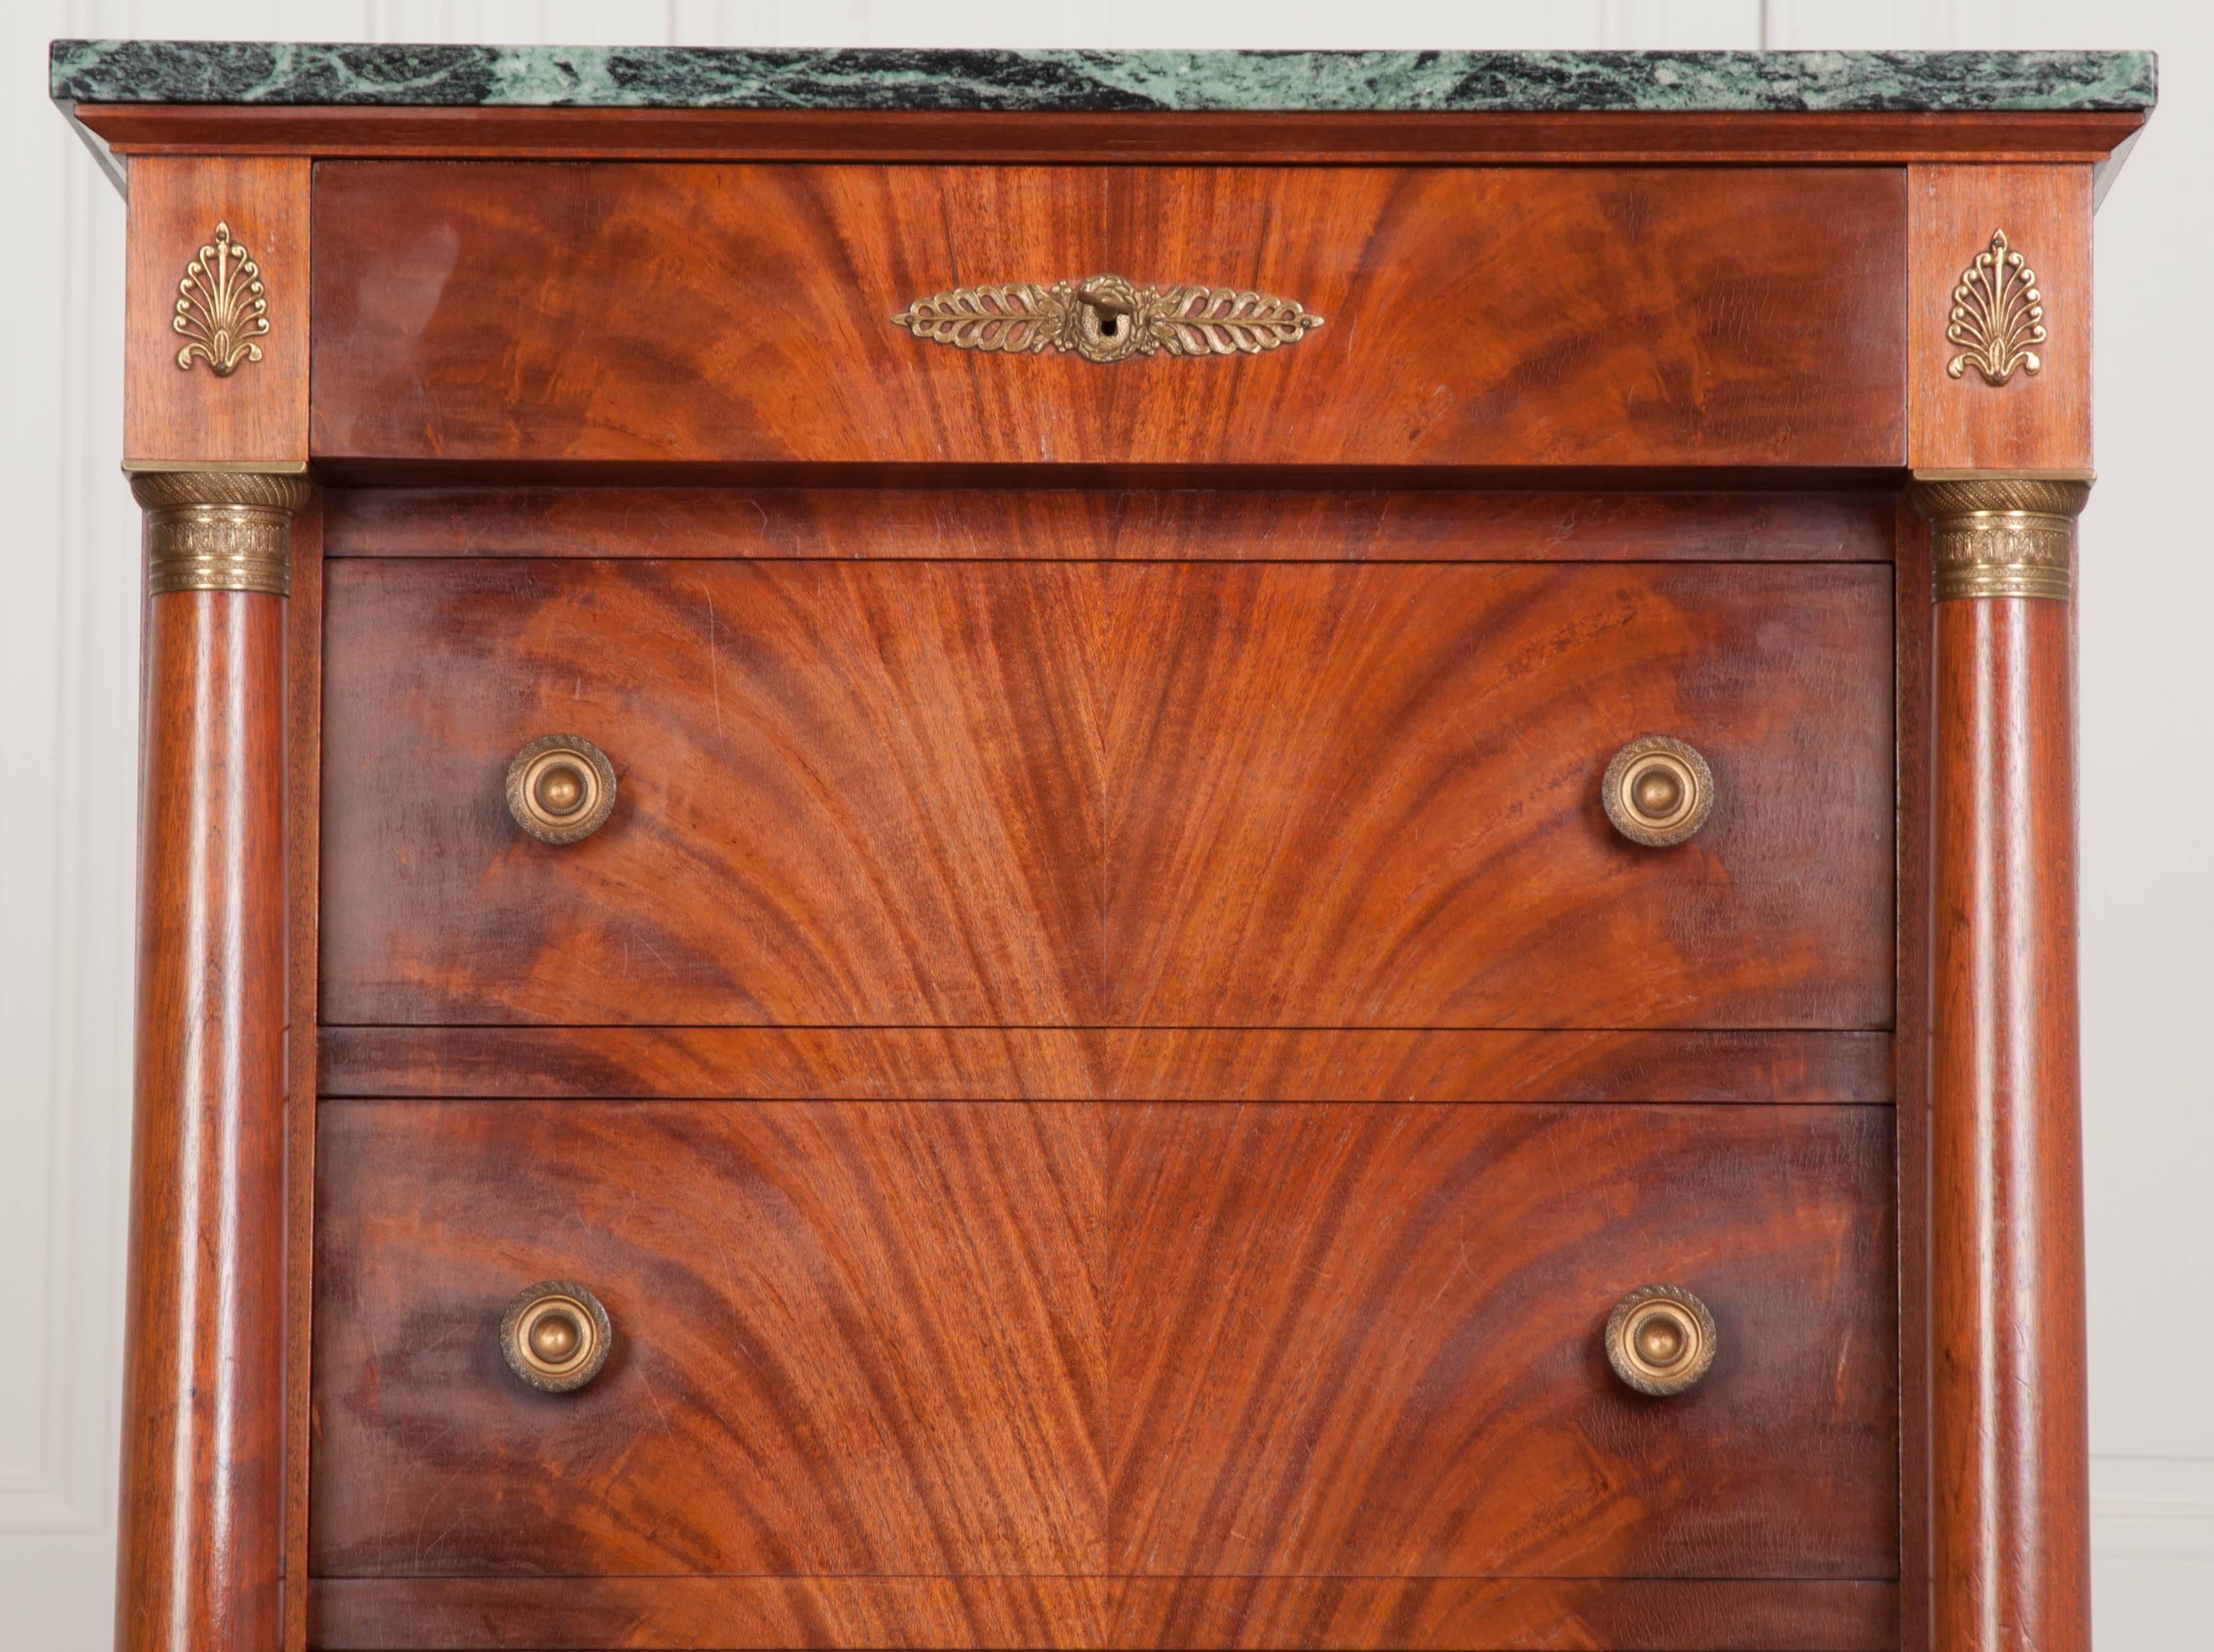 A fine mahogany lingerie commode, done in the Empire style, and made in France, circa 1940. An extremely well-preserved piece of marble sits atop this handsome antique. The commode contains seven total drawers. The topmost drawer lacks pulls, but